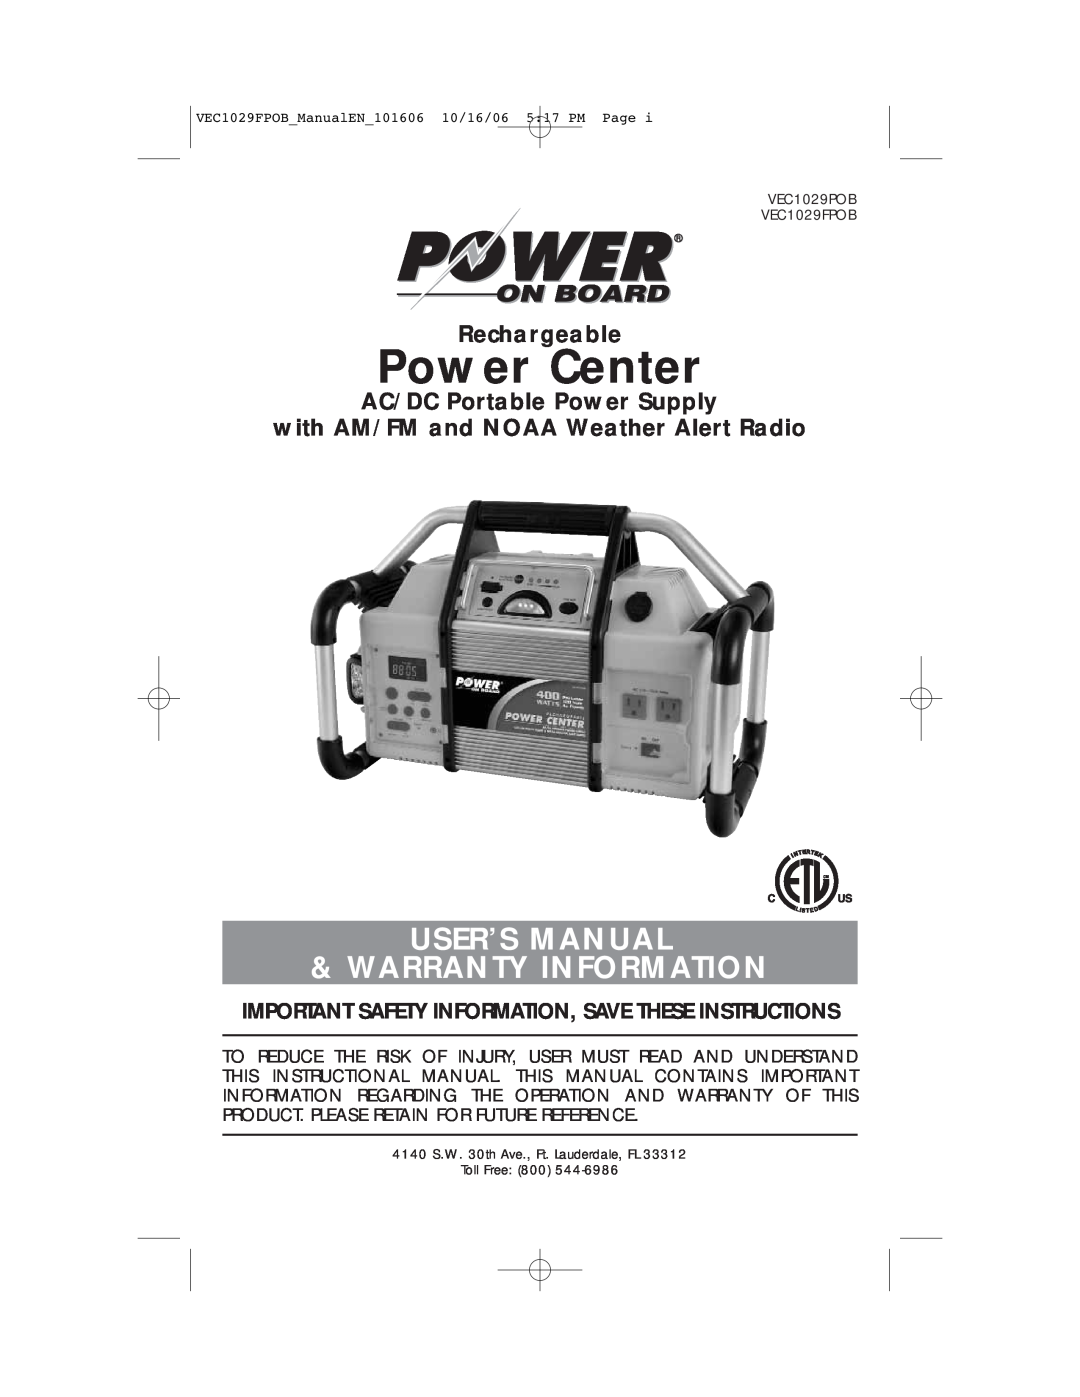 Energy Tech Laboratories VEC1029FPOB user manual Power Center, User’S Manual Warranty Information, Rechargeable 